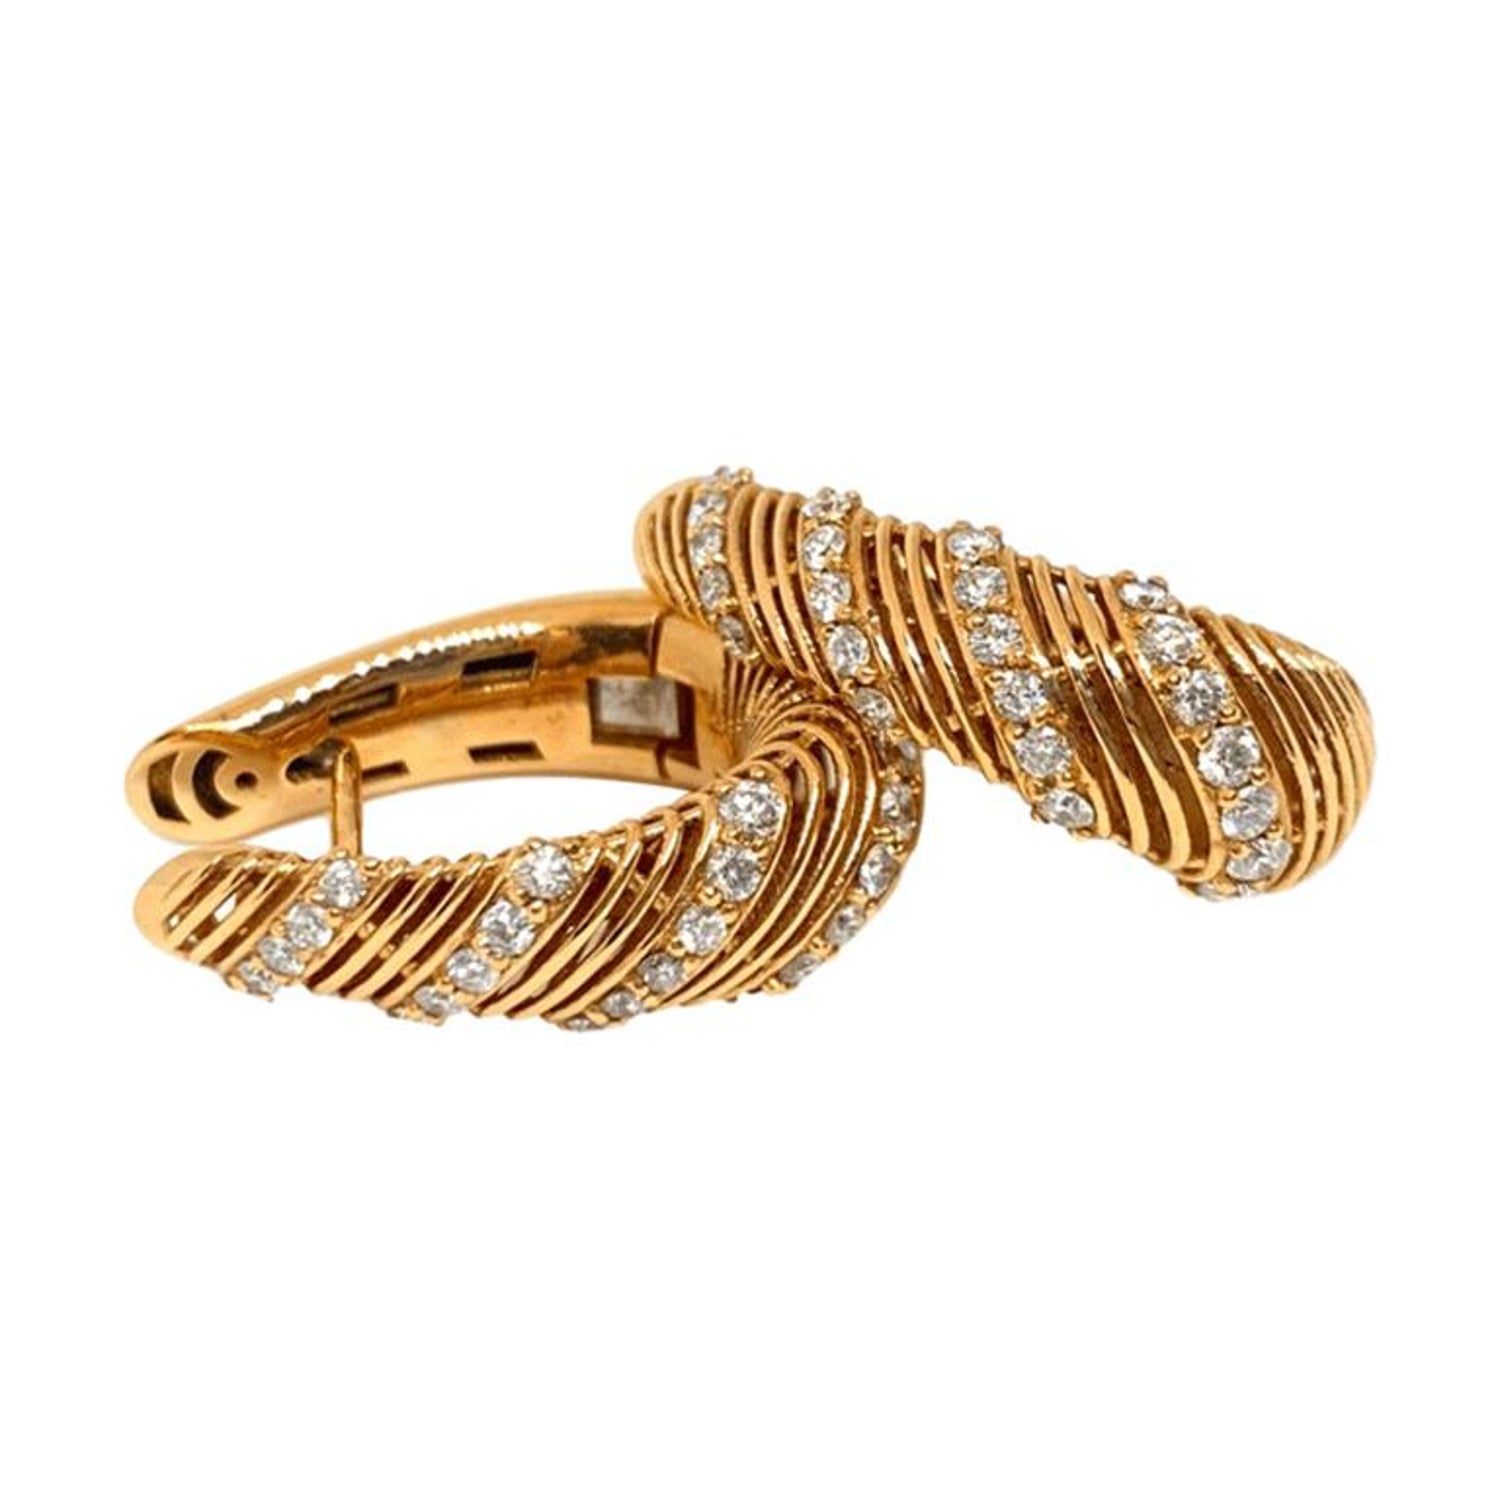 Louis Vuitton Idylle Blossom Single Hoop Earring Earrings 18K Yellow Gold  with Diamond Yellow gold 1860461